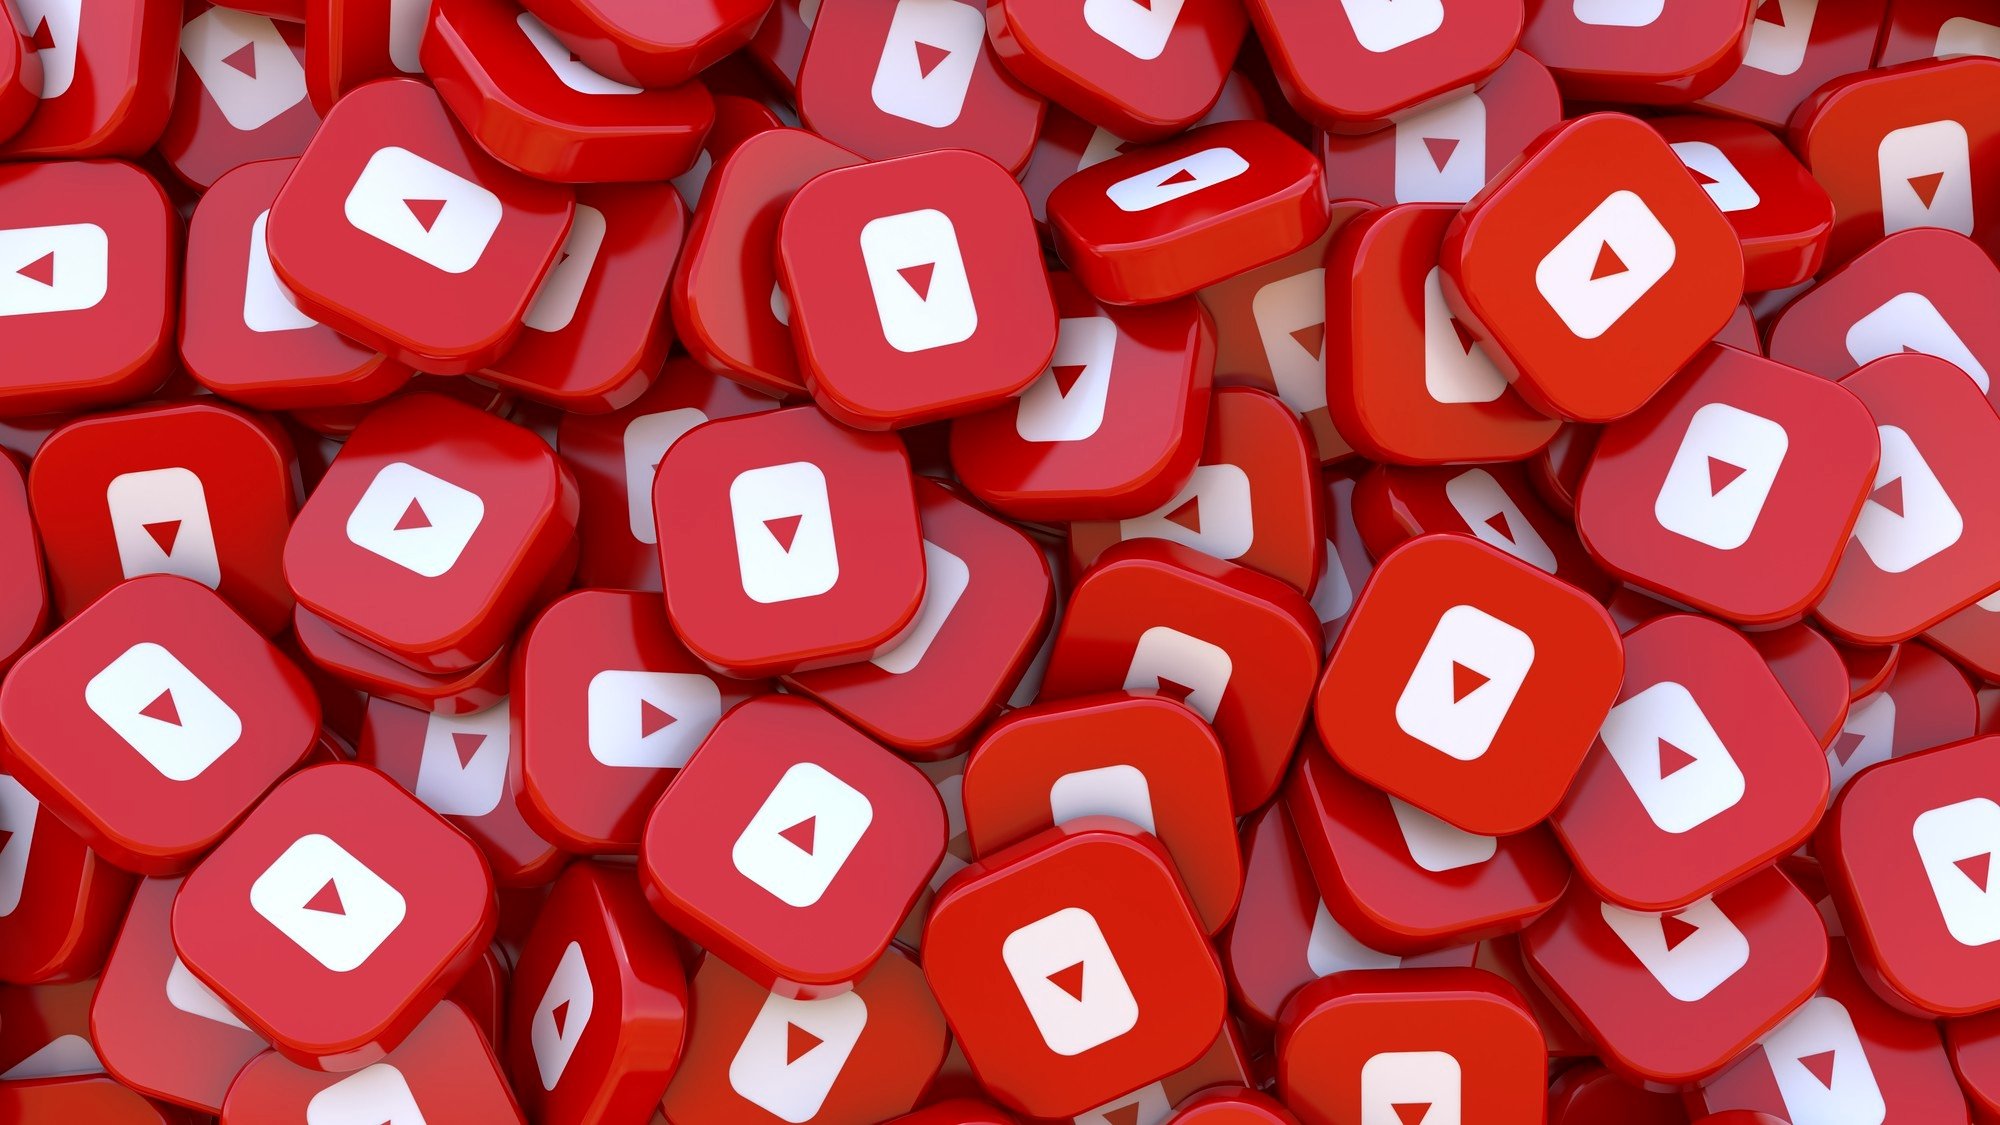 Lot of Youtube square badges in a close up view